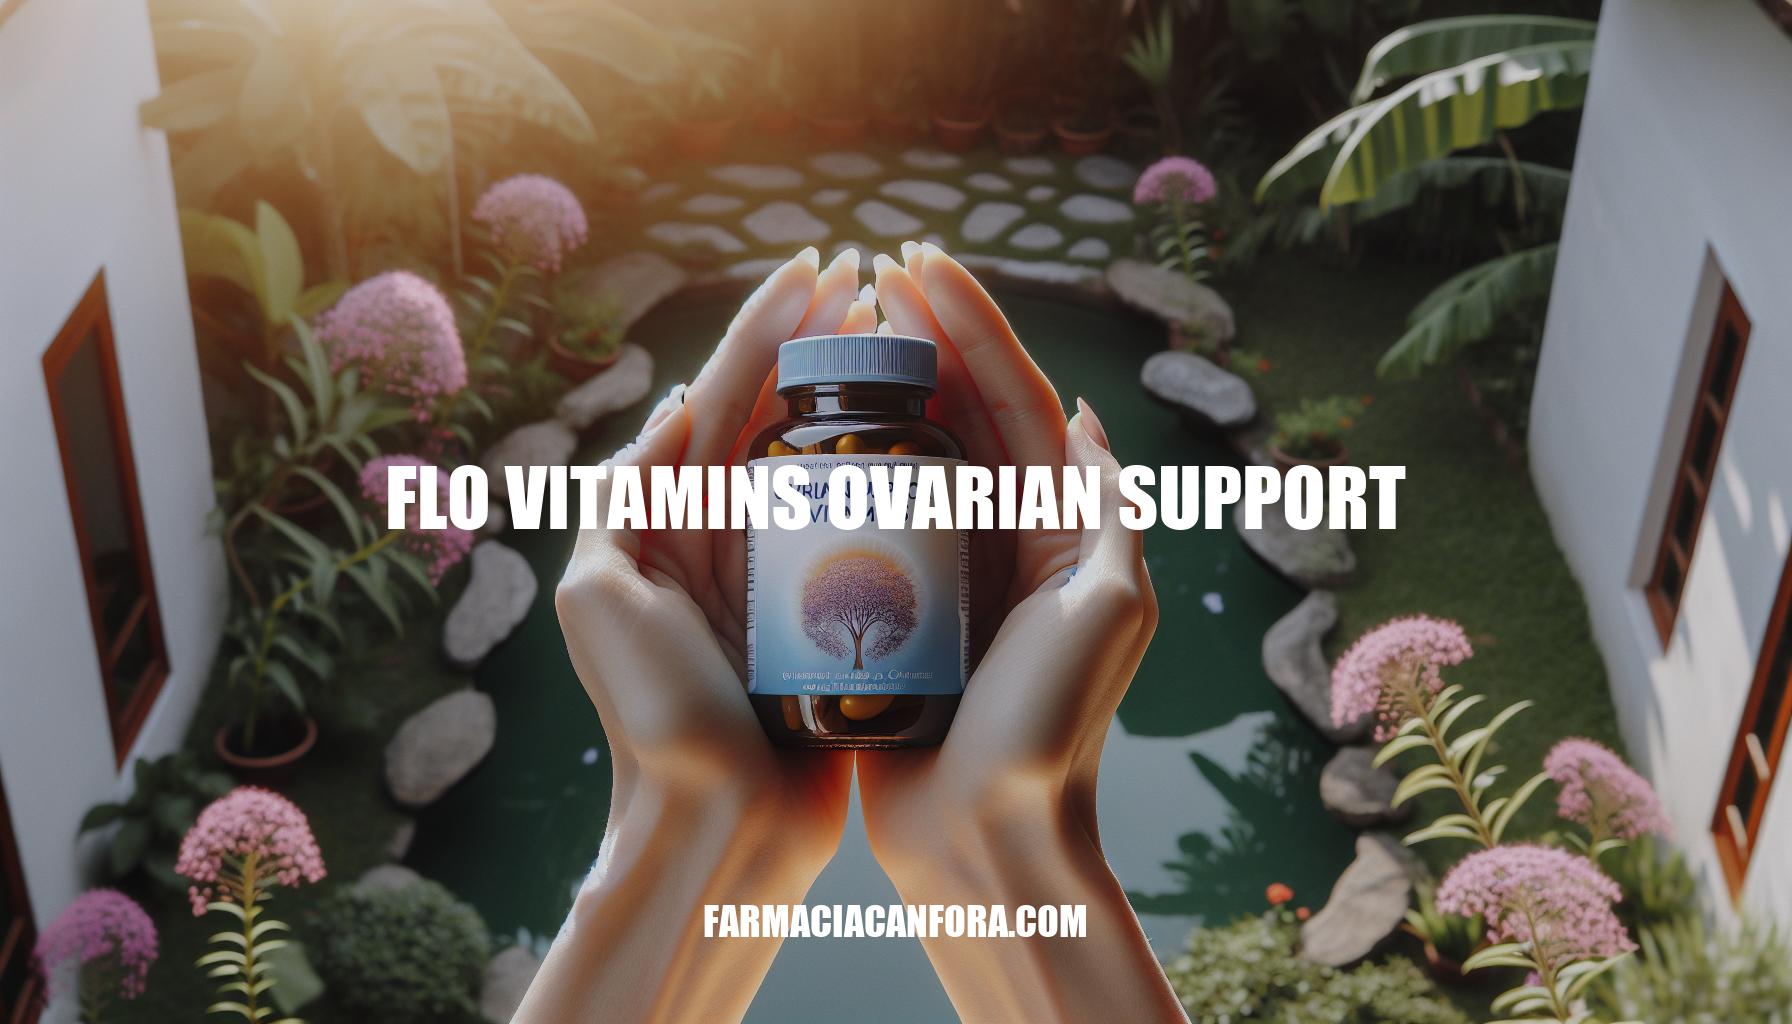 Flo Vitamins Ovarian Support: The Key to Improved Women's Health